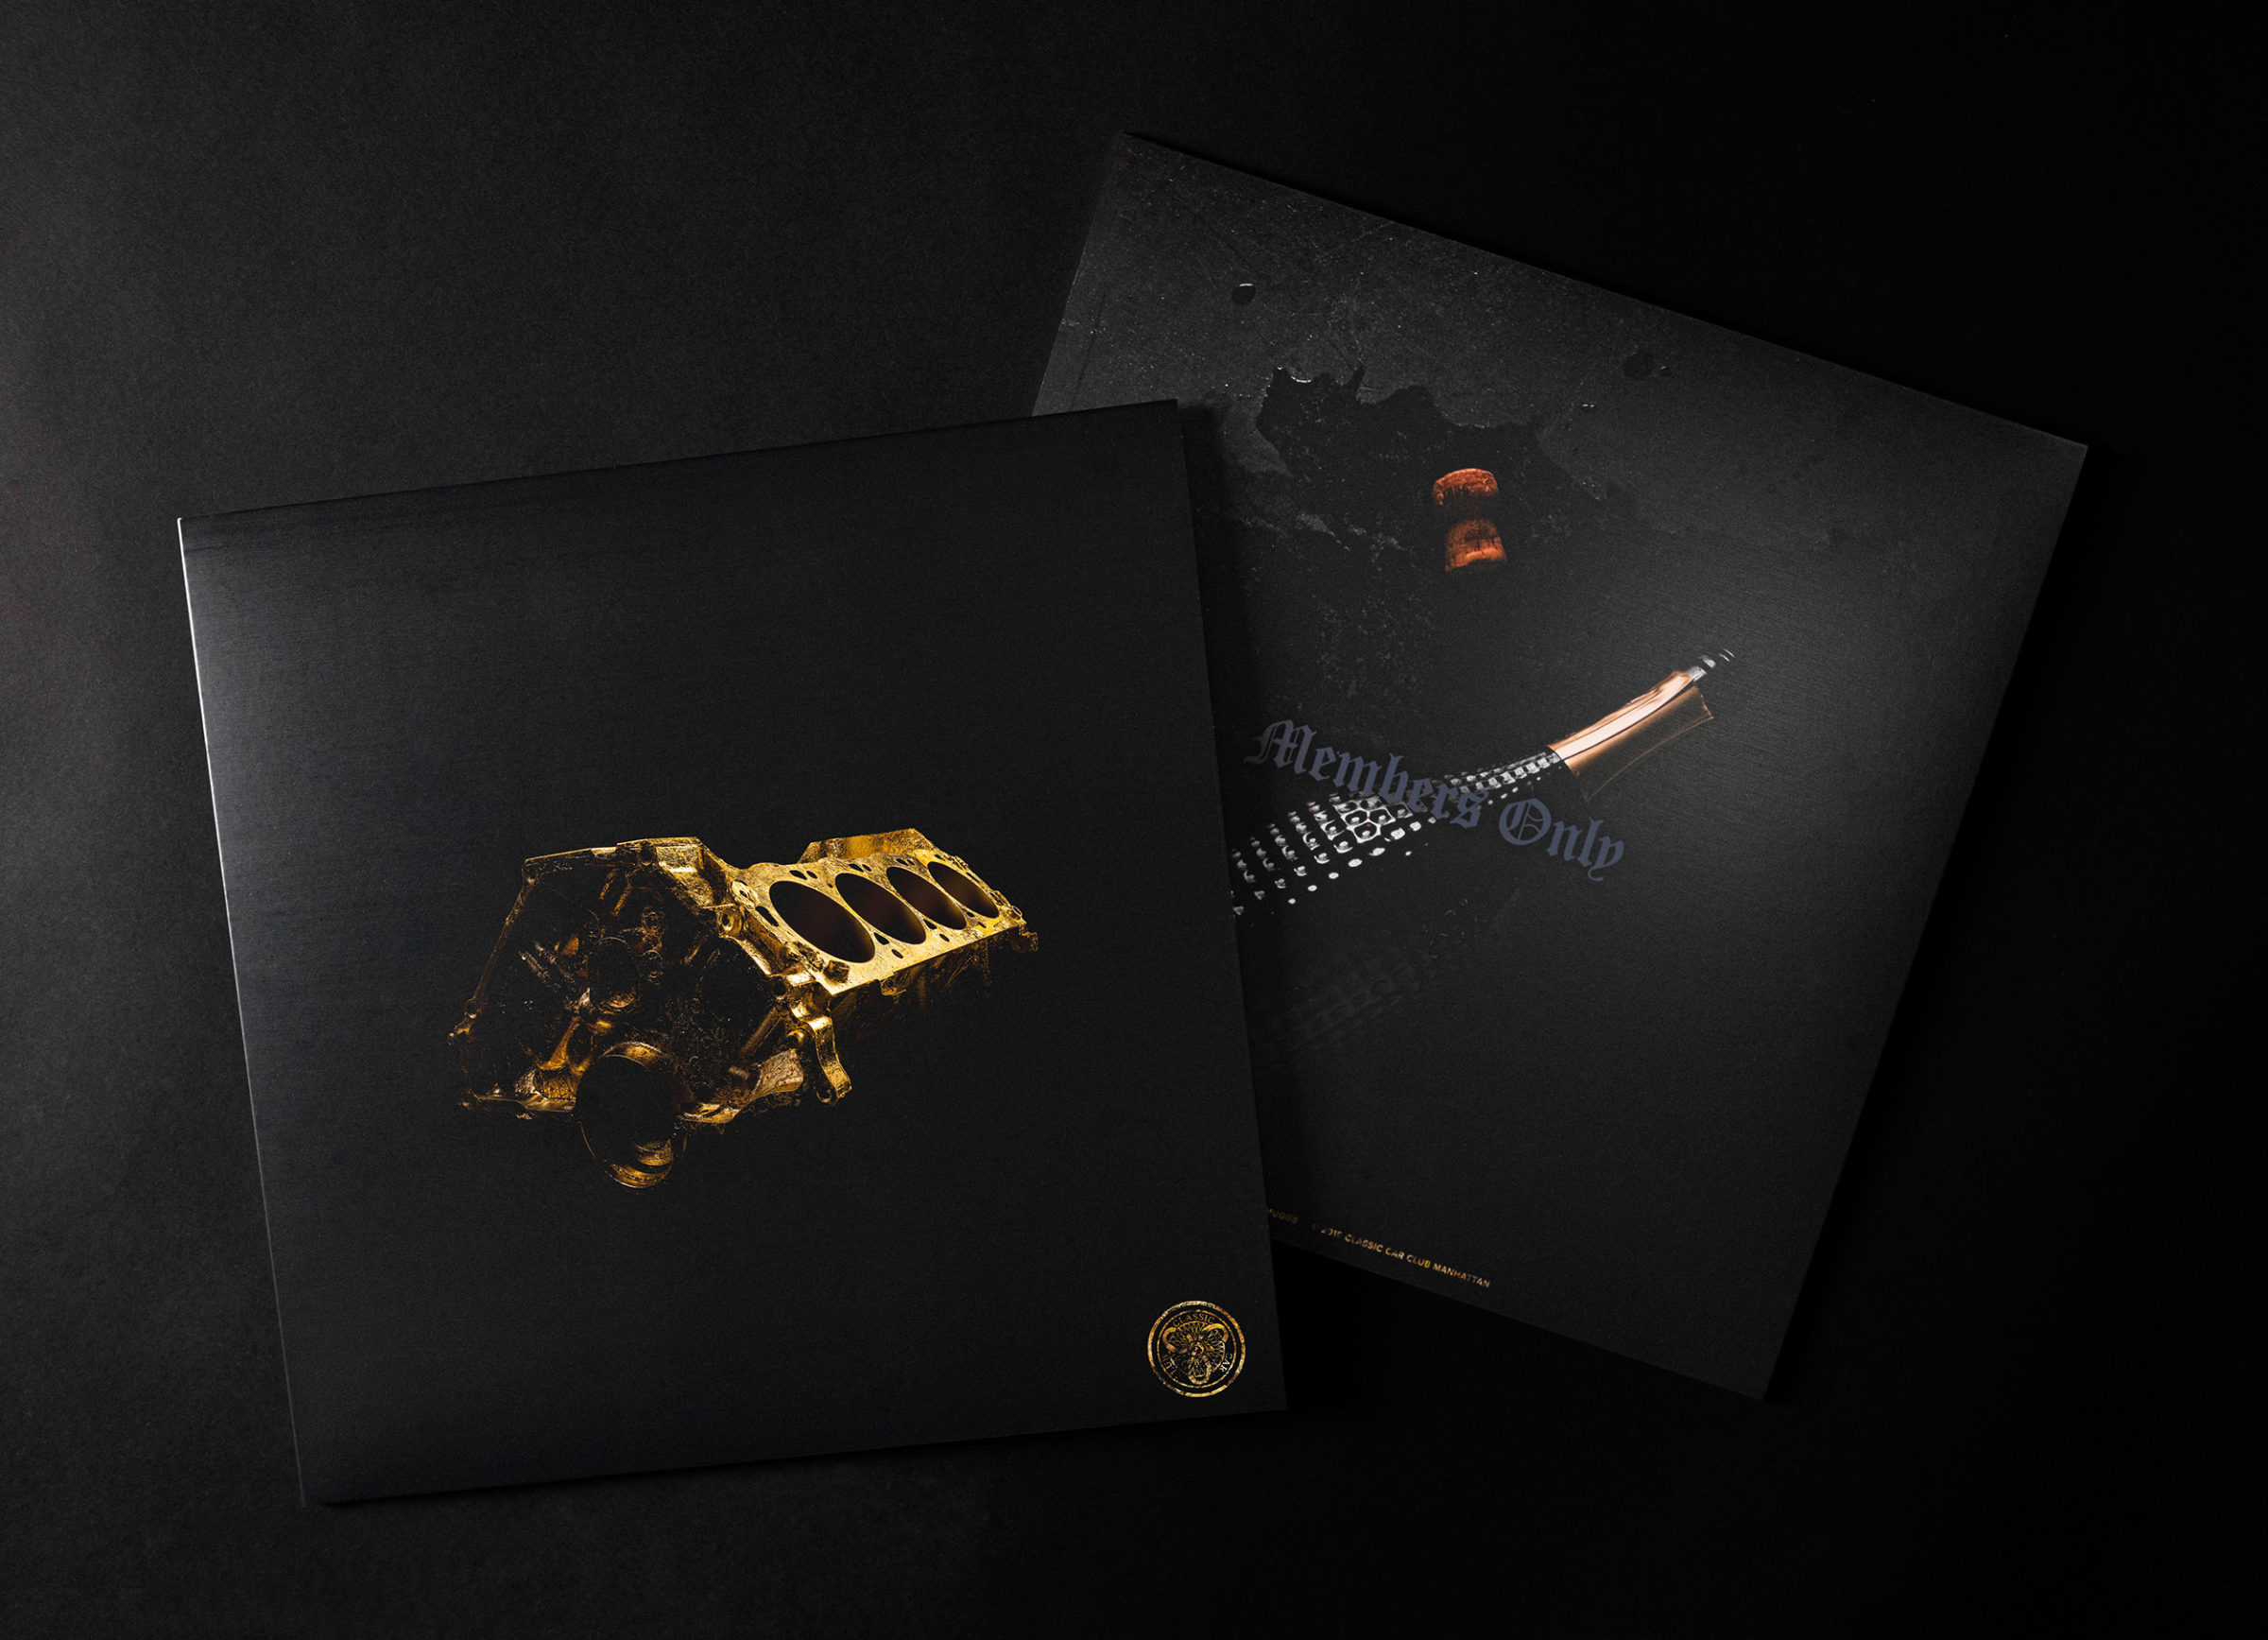 Members Only album packaging — front and back views of the vinyl record.